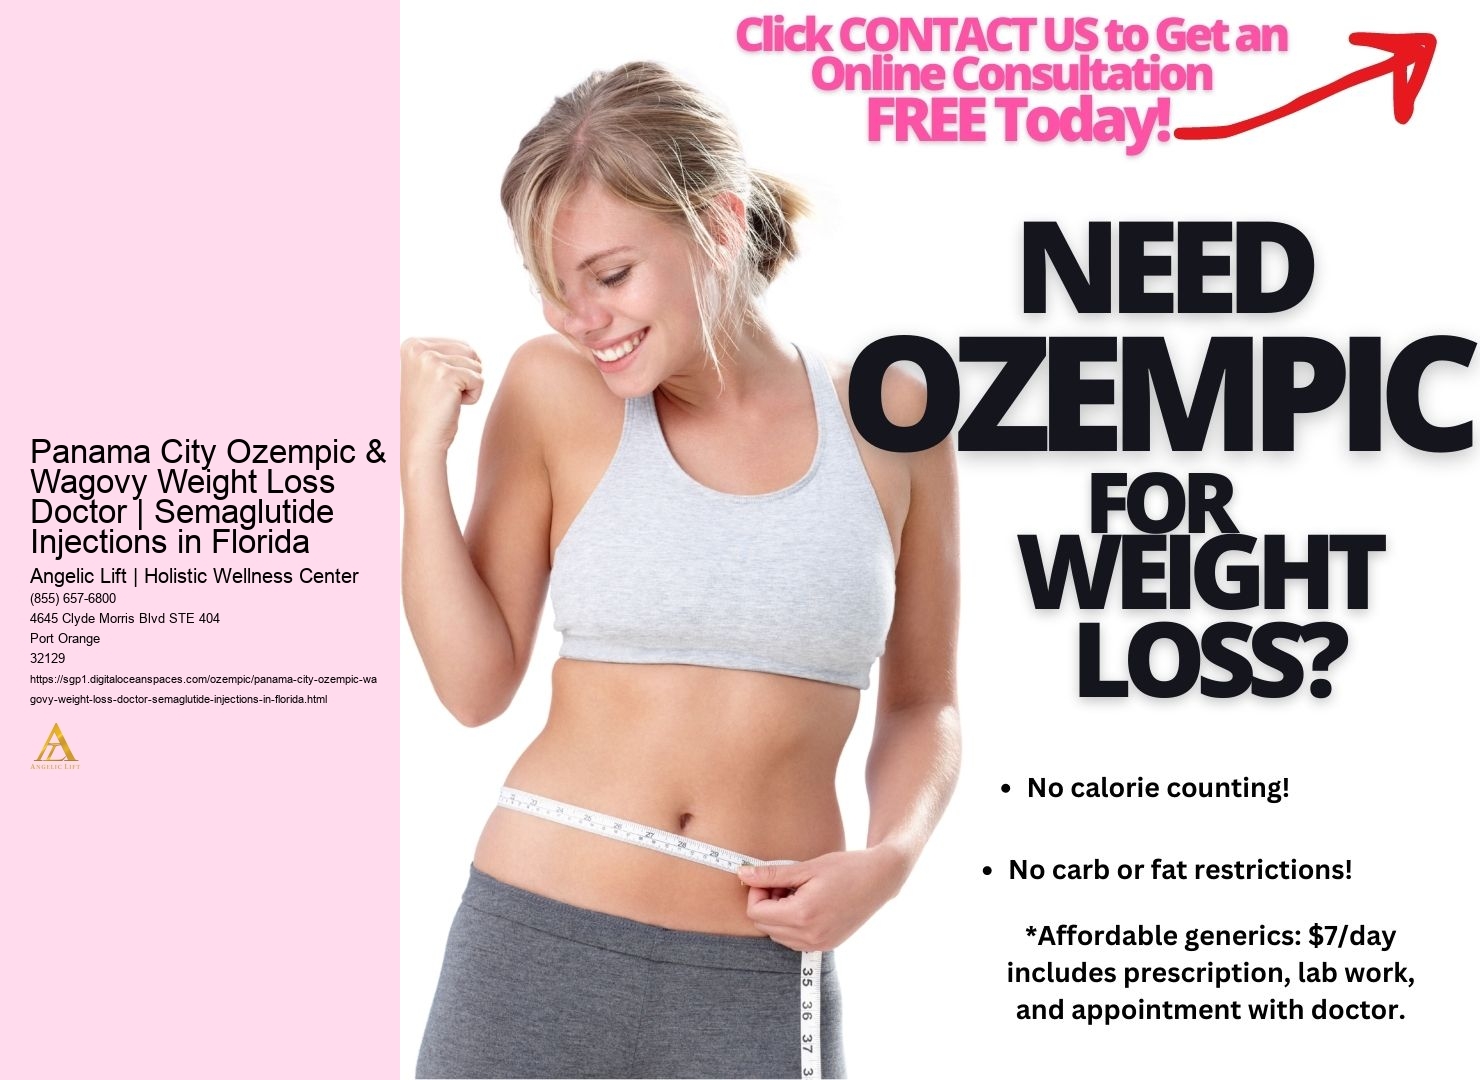 Panama City Ozempic & Wagovy Weight Loss Doctor | Semaglutide Injections in Florida